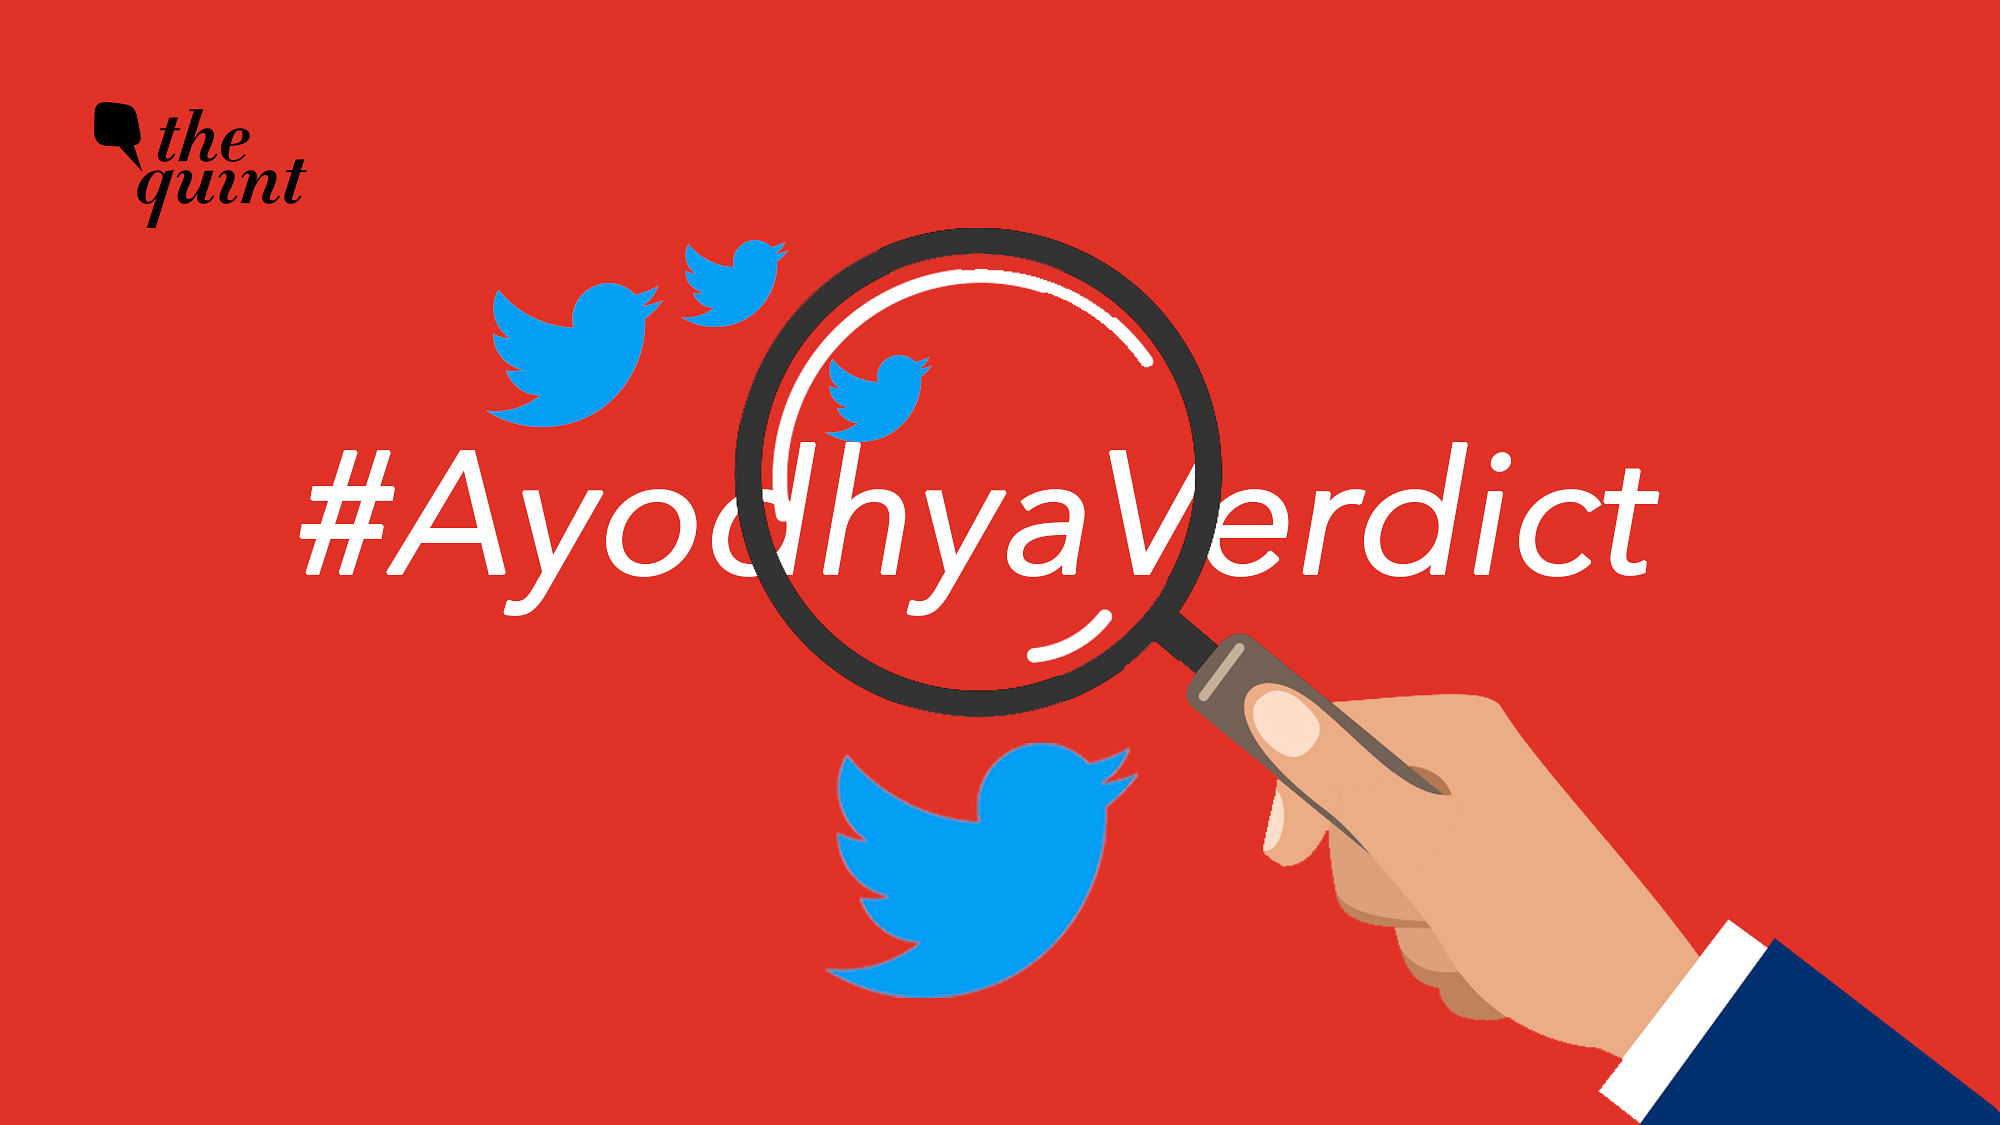 Ahead of the Ayodhya verdict, inflammatory tweets are being circulated, will the police take action against errant users?